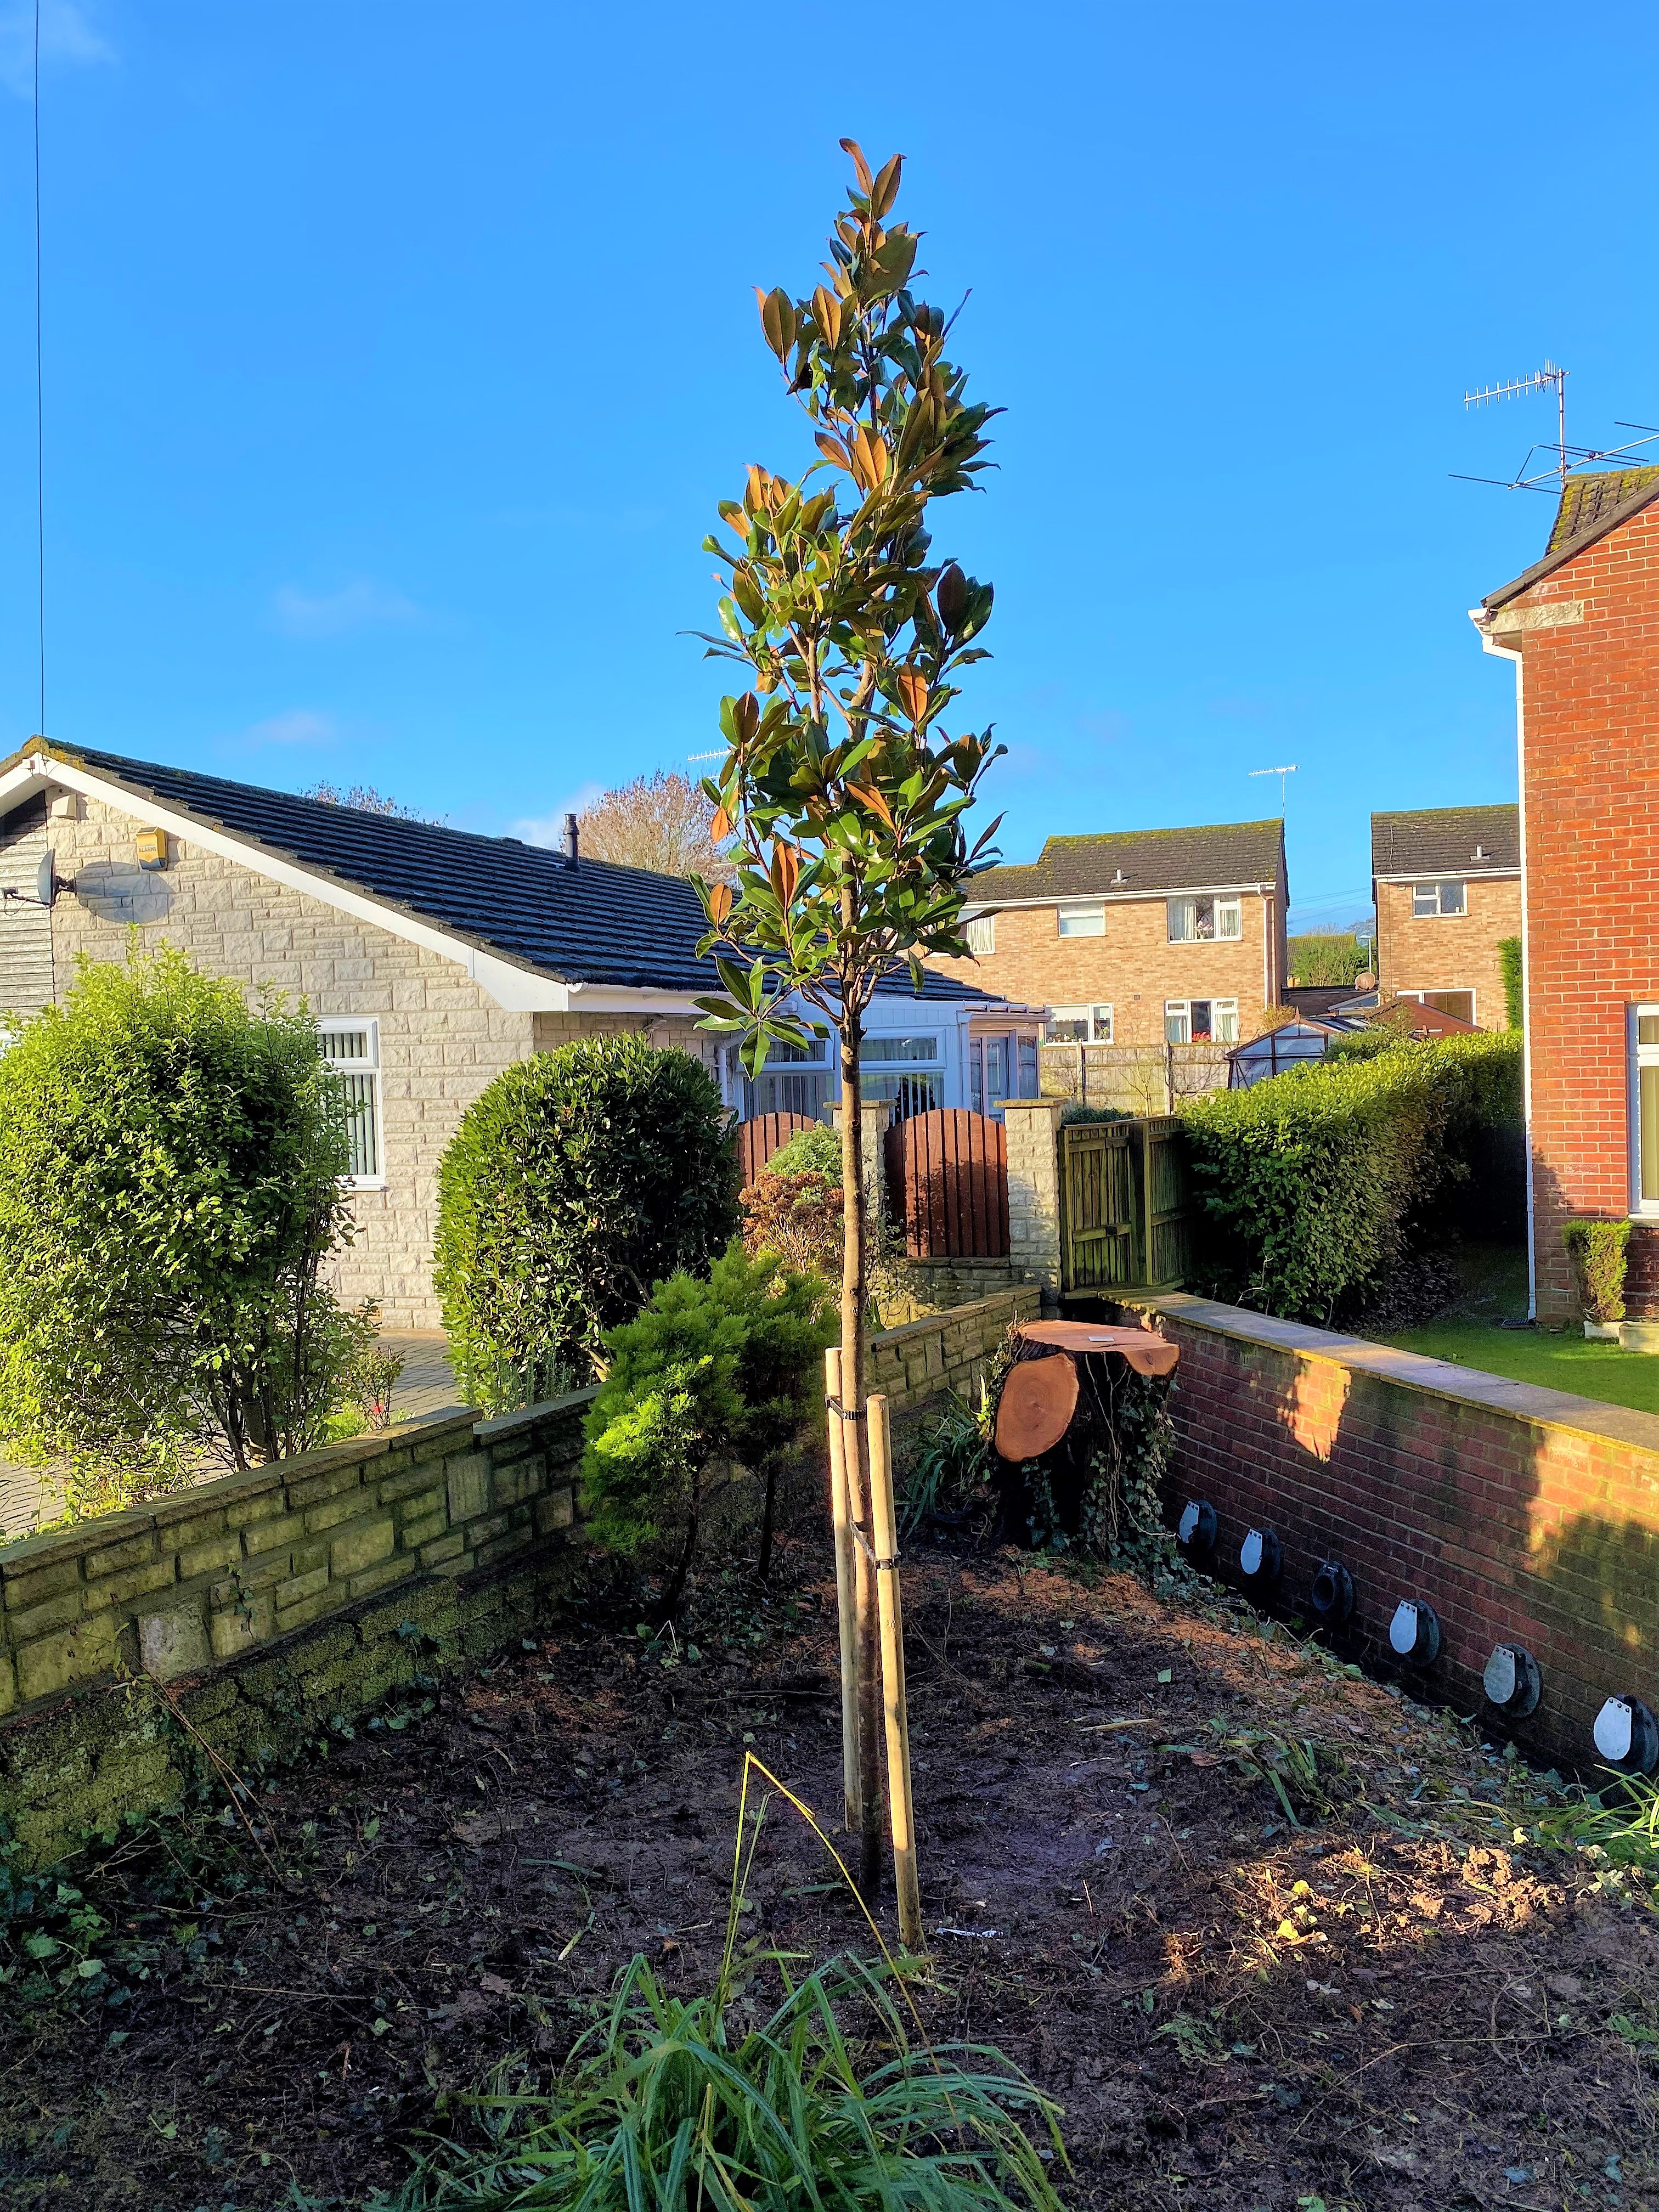 Dorset Treeworx Ltd | Tree planted in Weymouth, Portland, Dorchester in Dorset - Tree planting after tree removal with a Dorset council tree application consent in Weymouth, Dorset